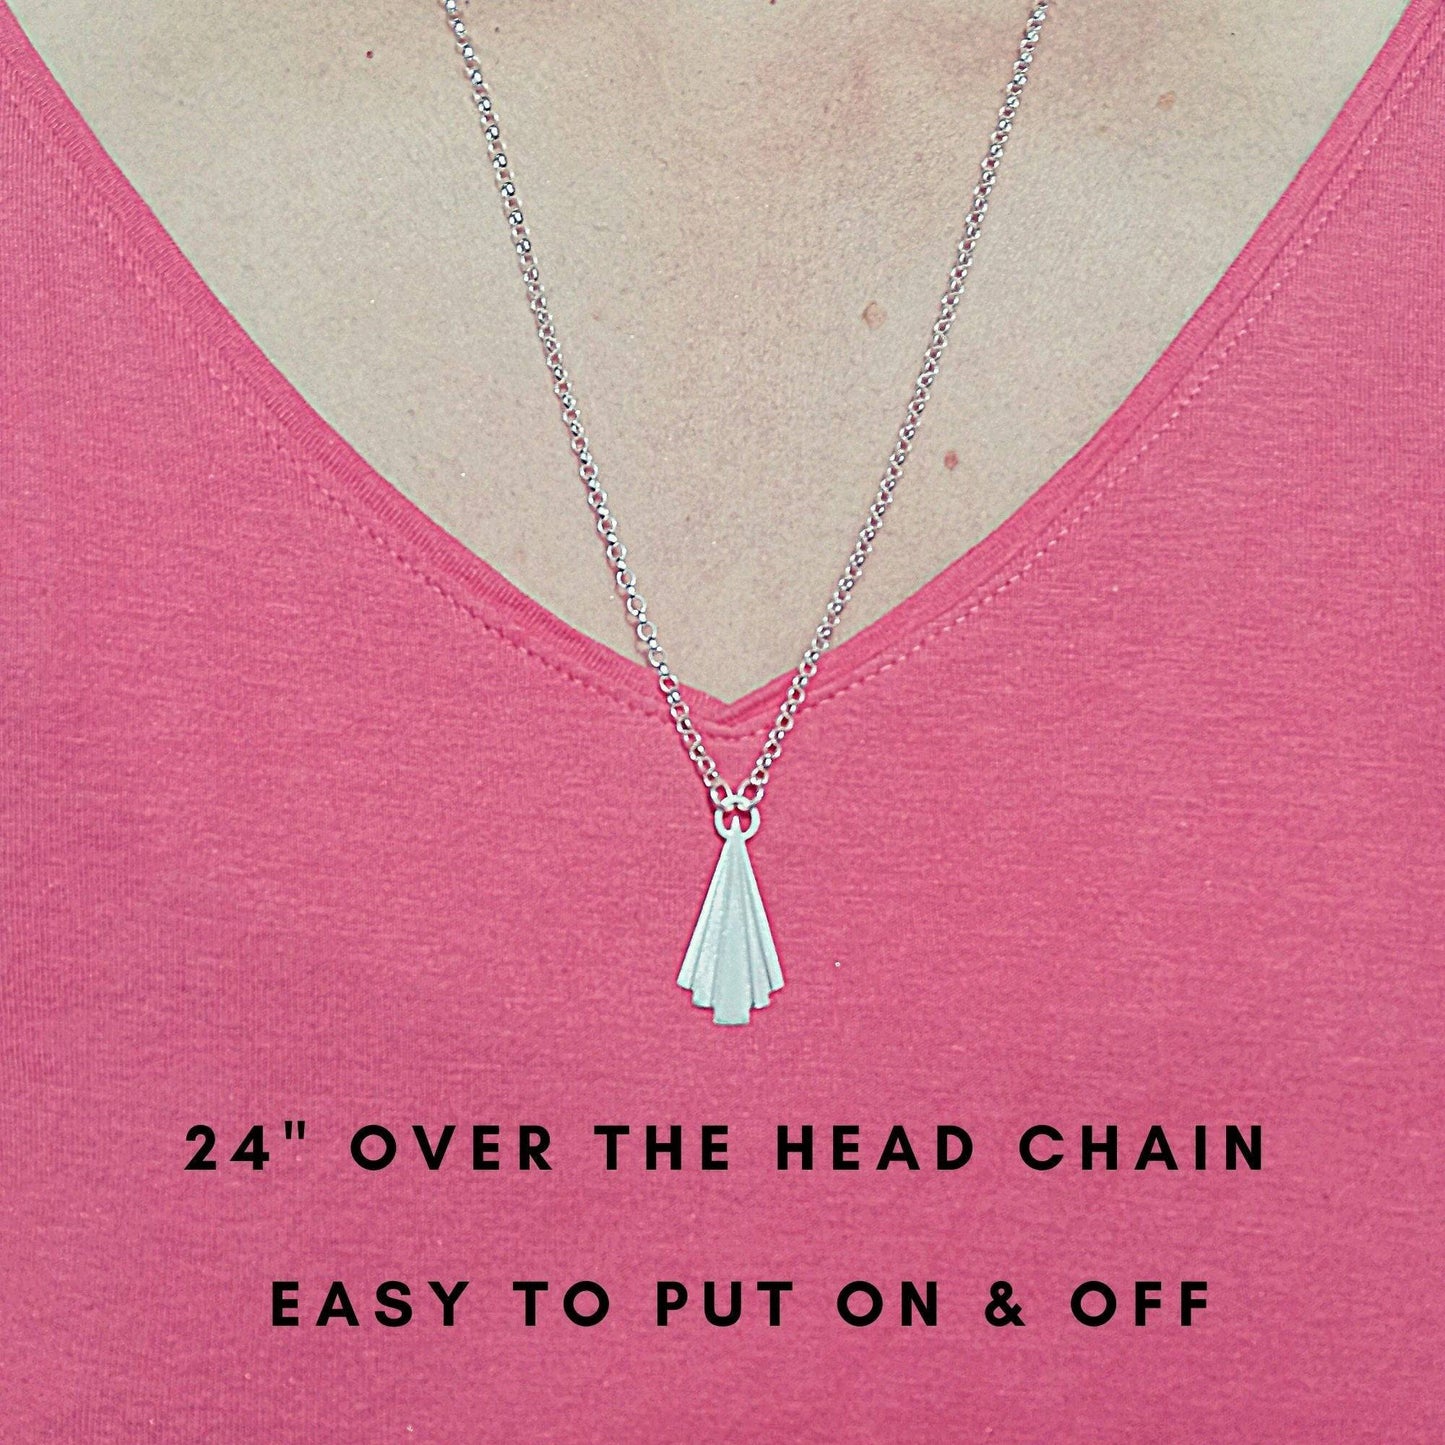 Deco necklace 24" over the head chain - Tamar and Talya